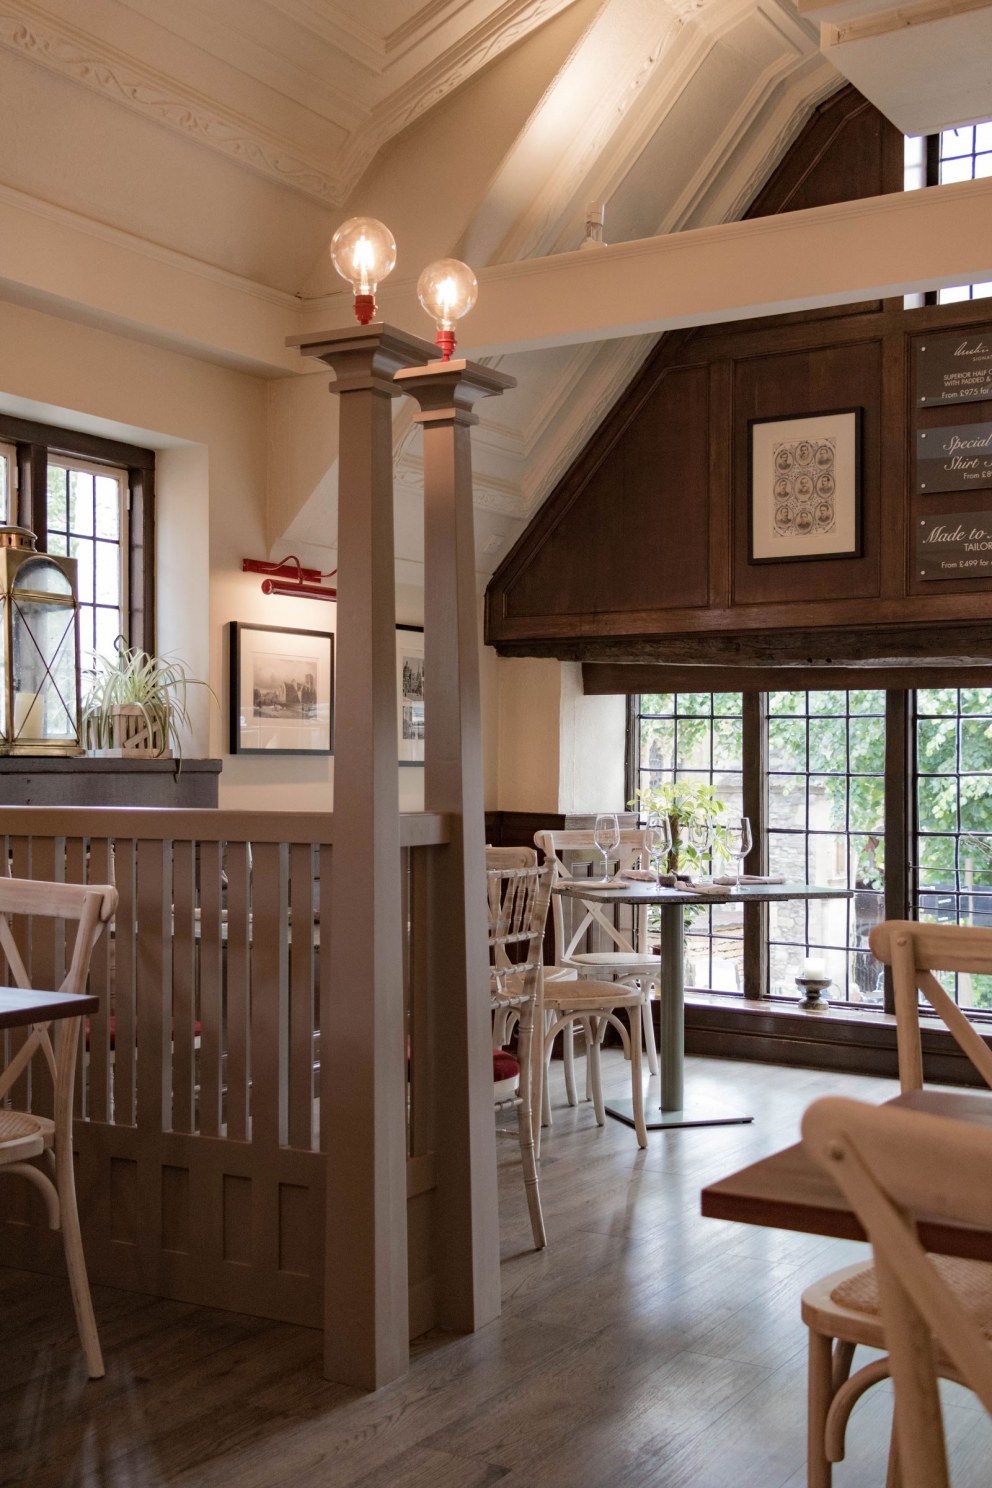 The Plough, Central Oxford | First floor bespoke joinery dividers, all in the Arts & Crafts style | Interior Designers